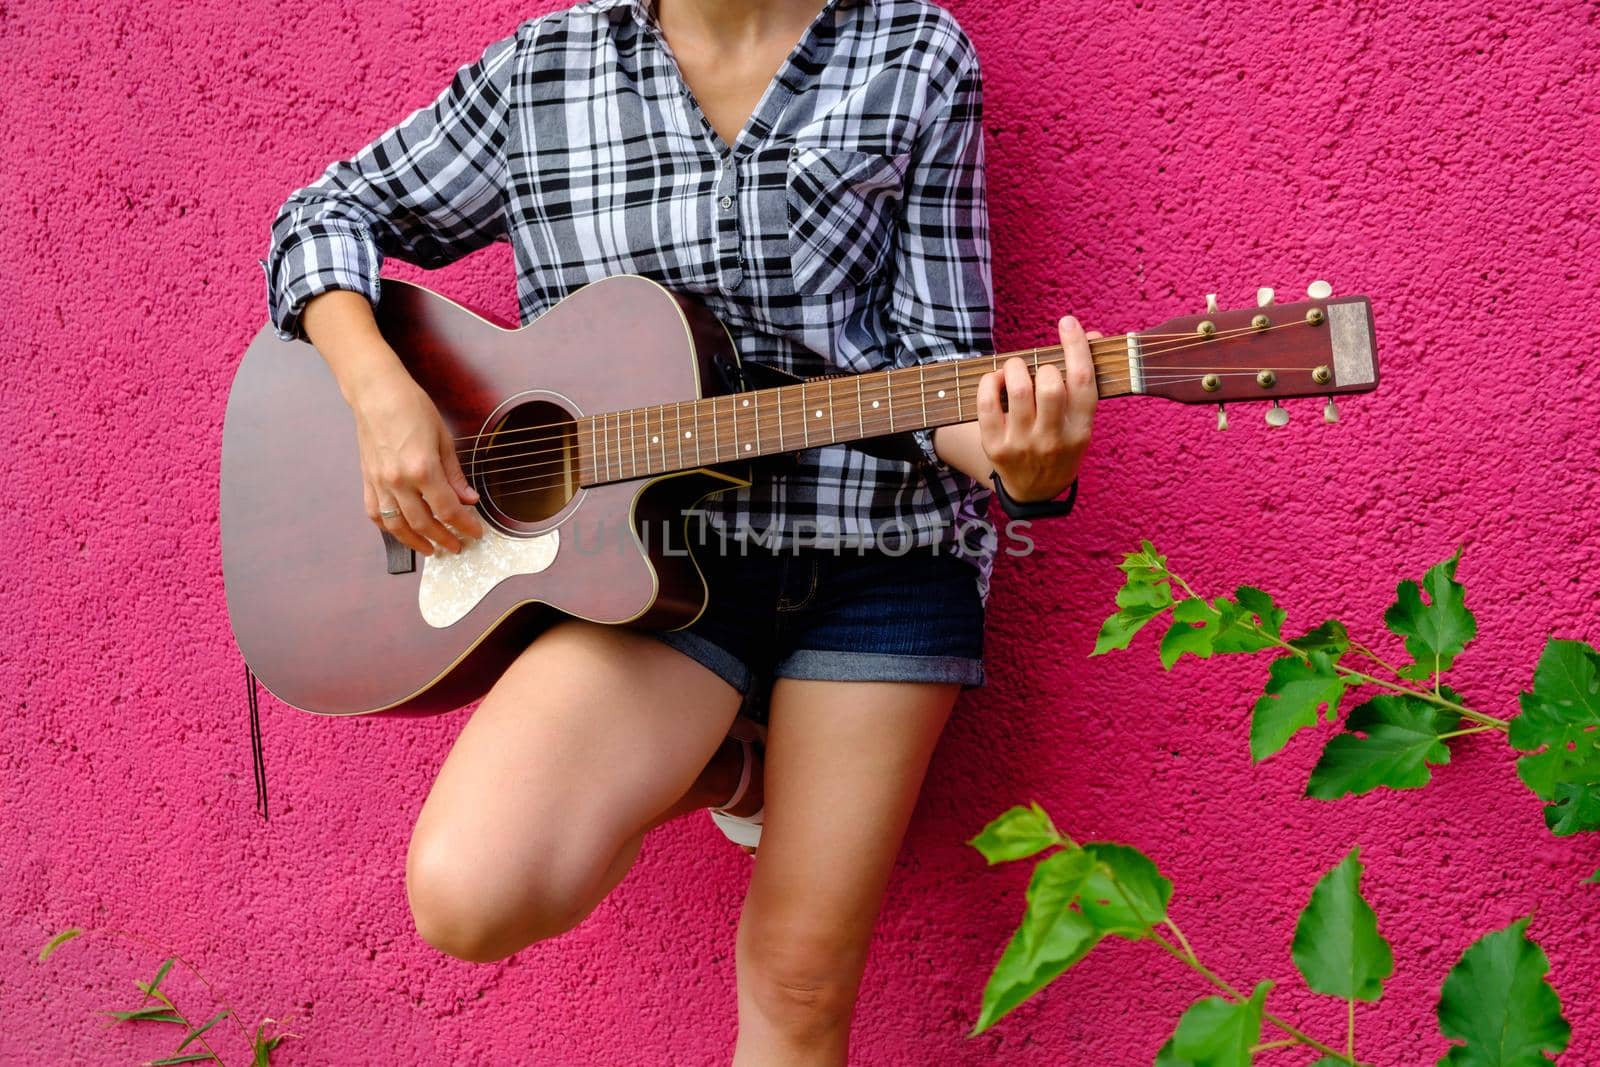 Beautiful girl plays the acoustic guitar. Guitarist on a pink background. Handsome young acoustic guitar blues player performing his musical skills.